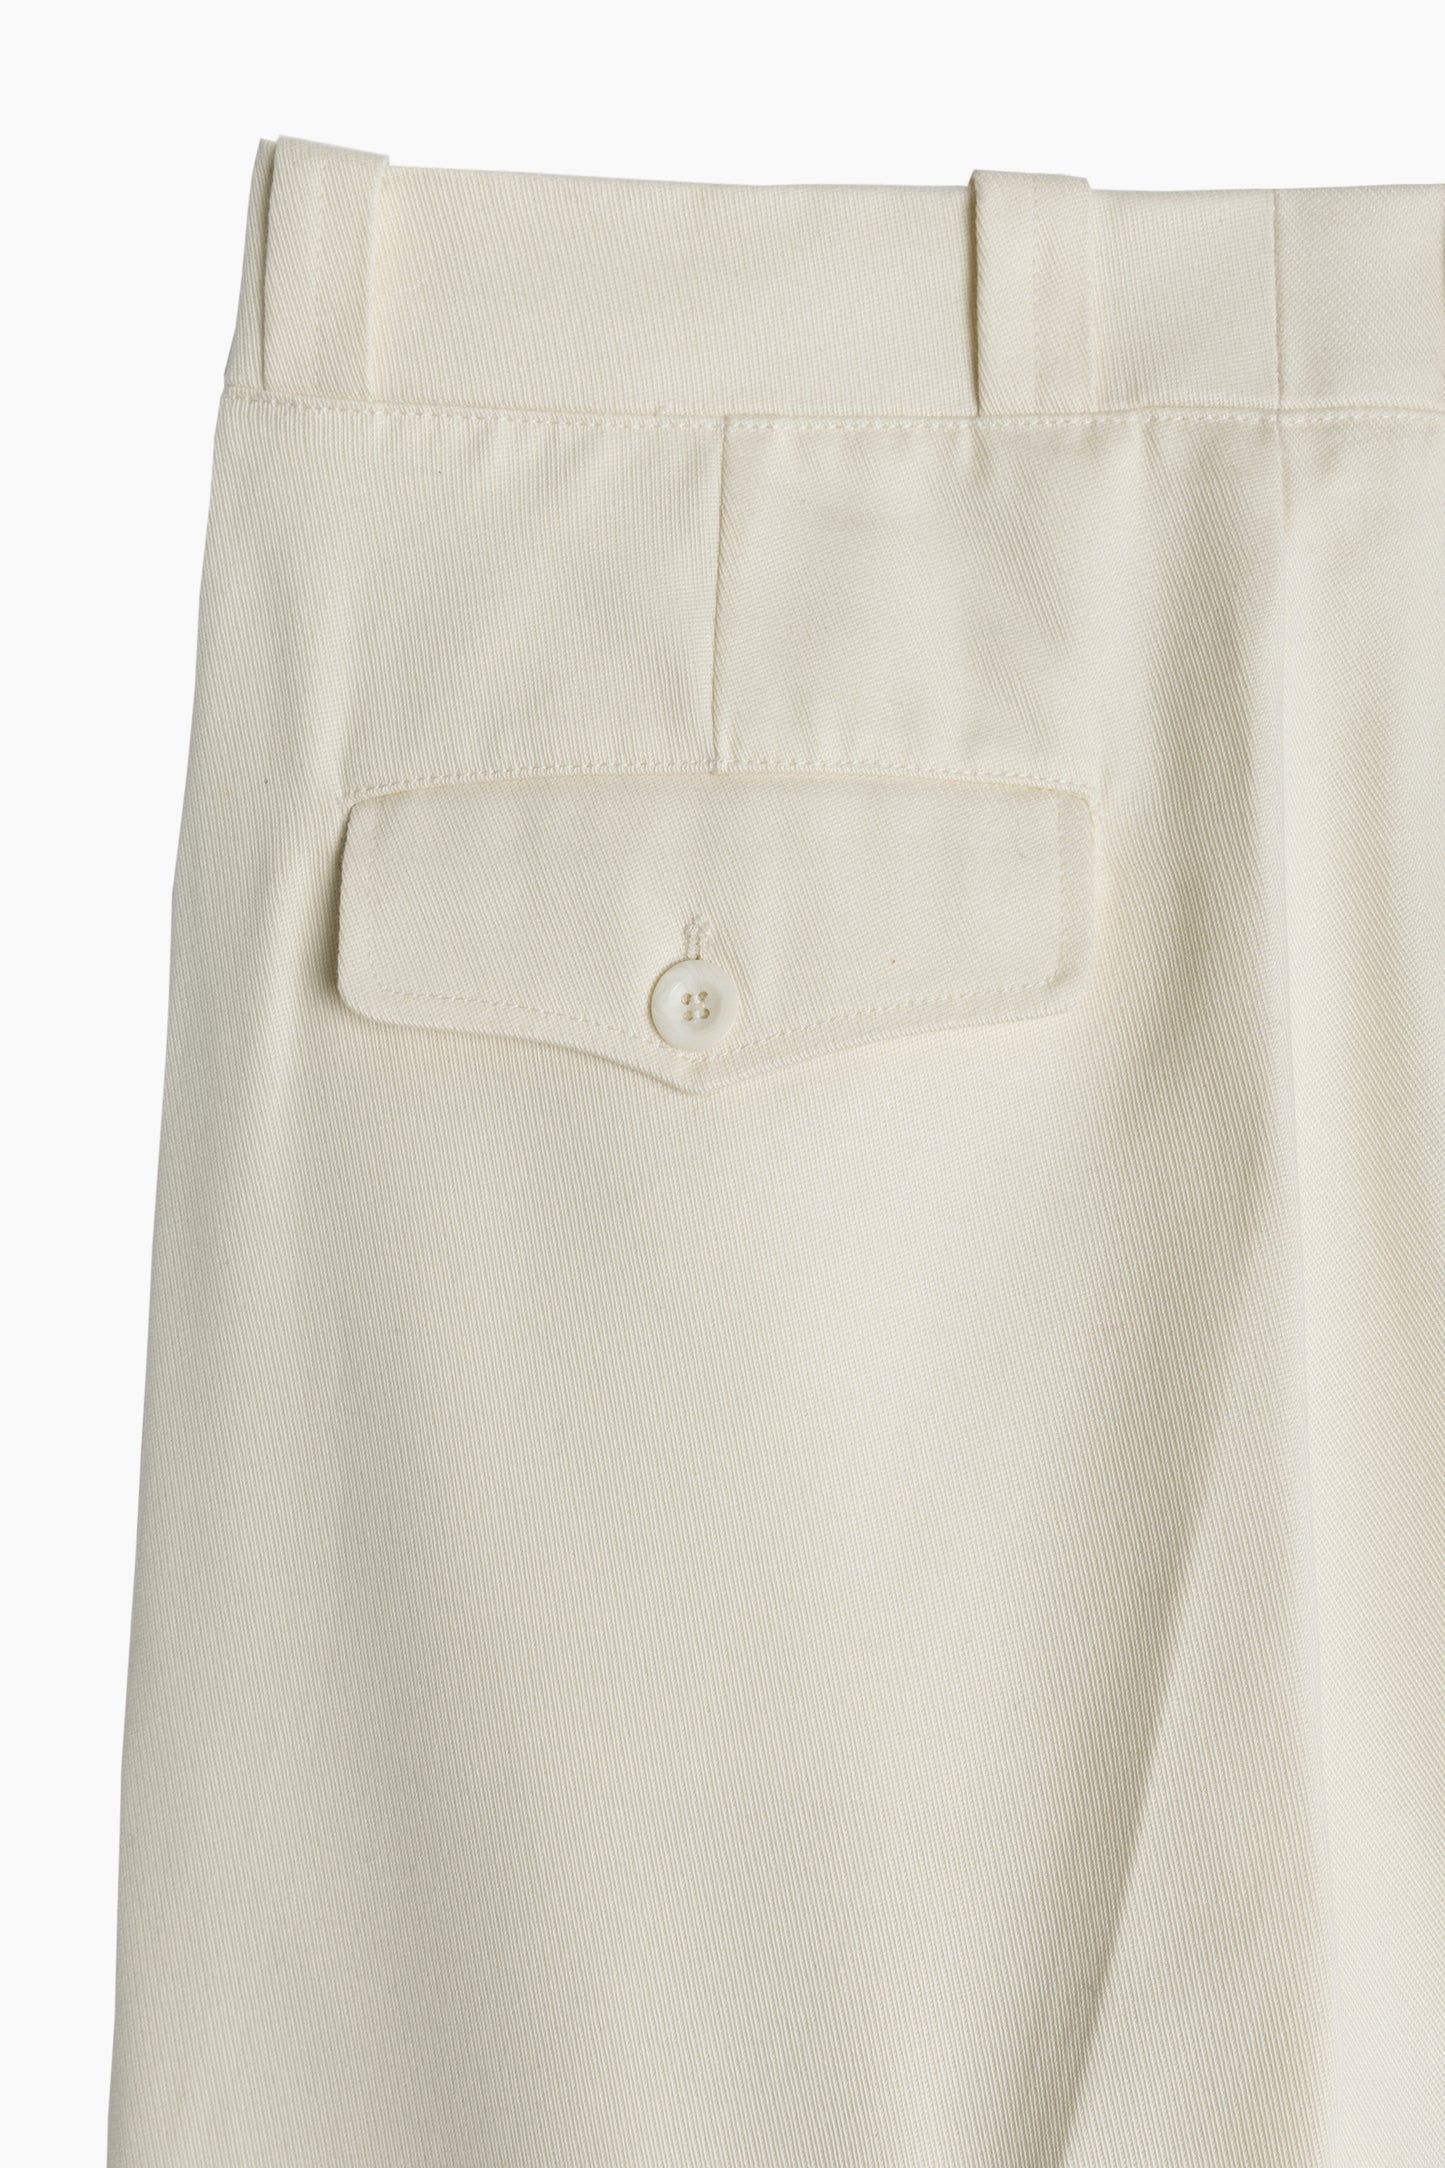 French Military Pants - Cream Cotton